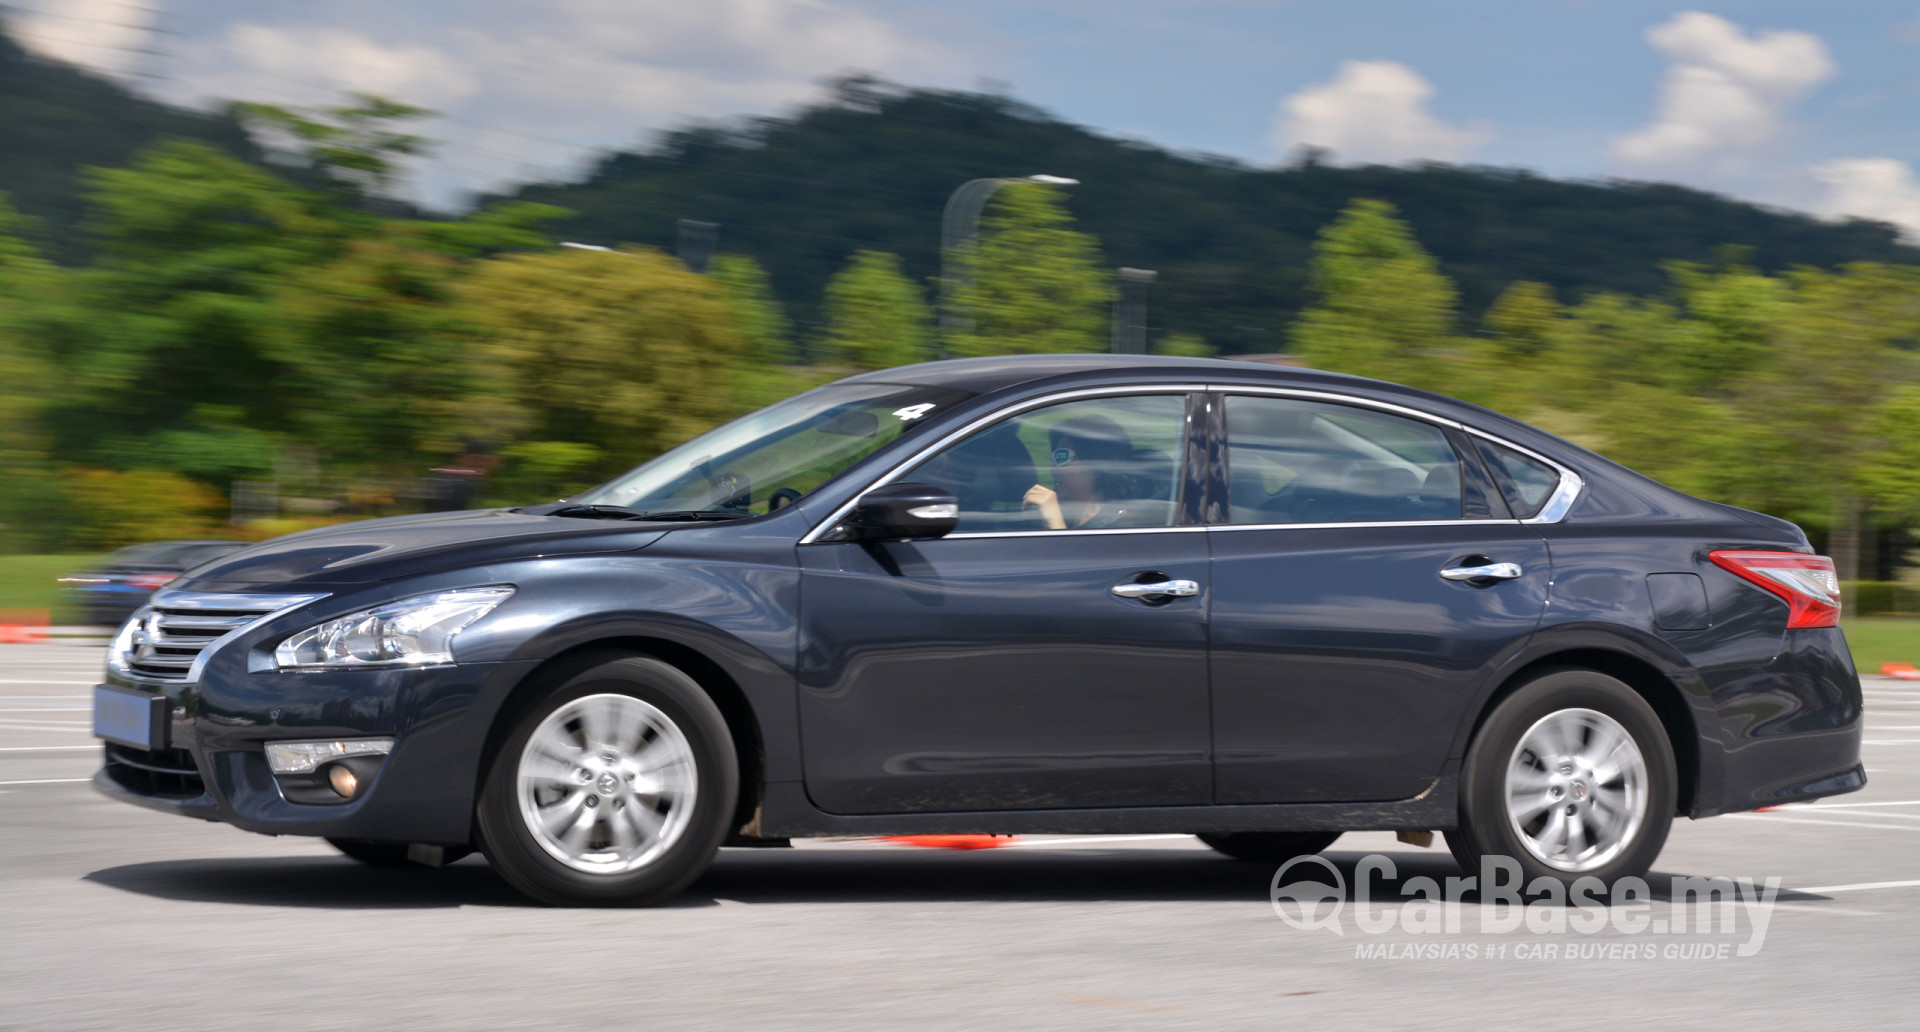 Nissan Teana L33 (2014) Exterior Image in Malaysia - Reviews, Specs ...